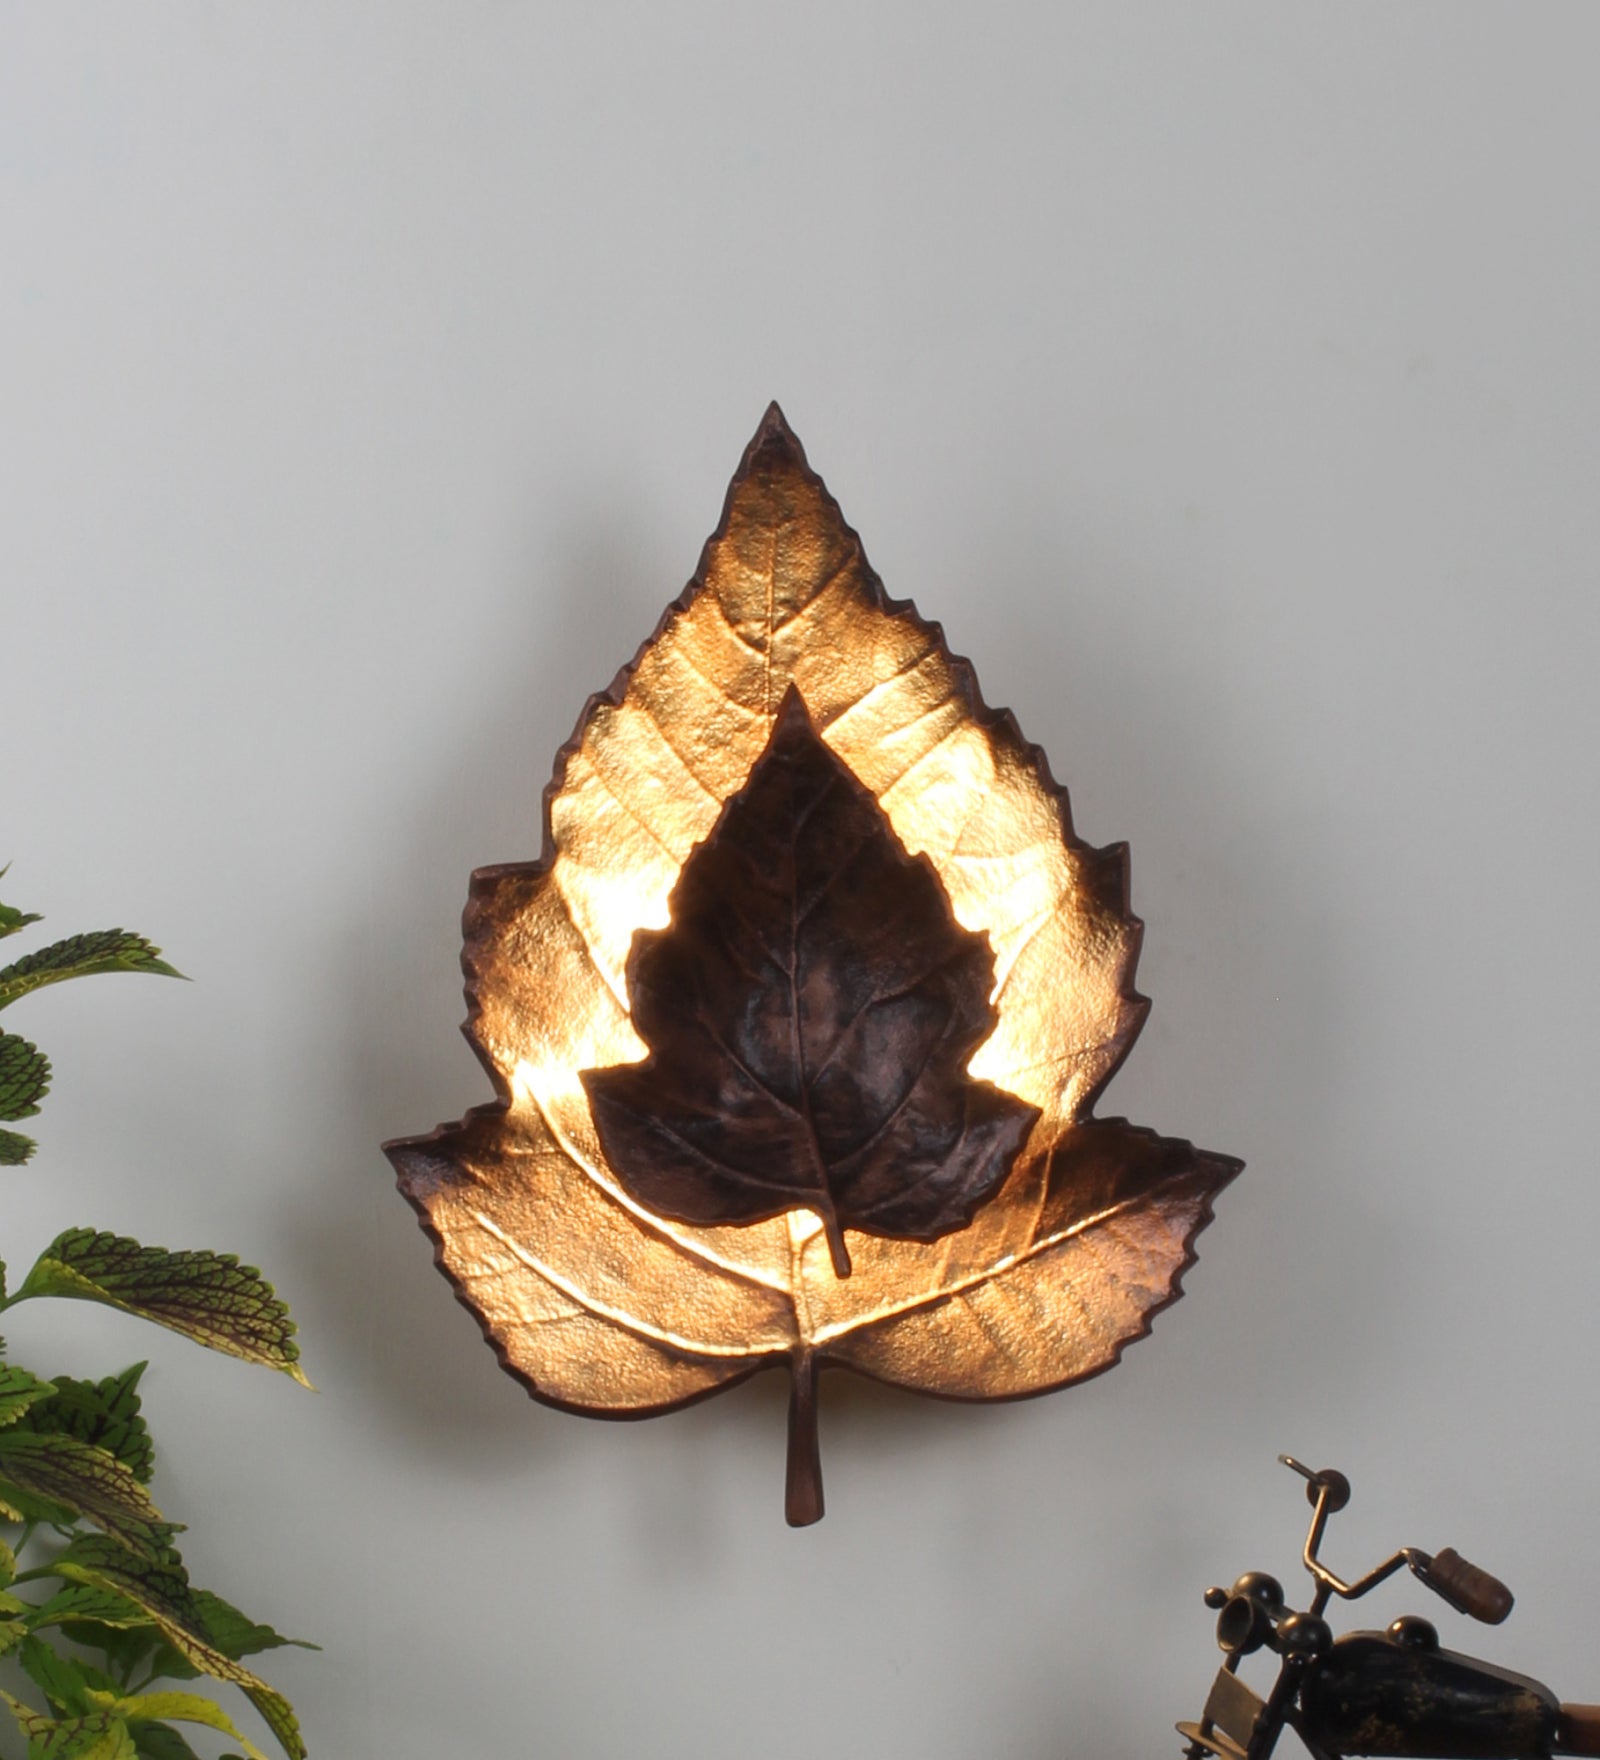 Leaf wall light is a Nature-inspired lighting